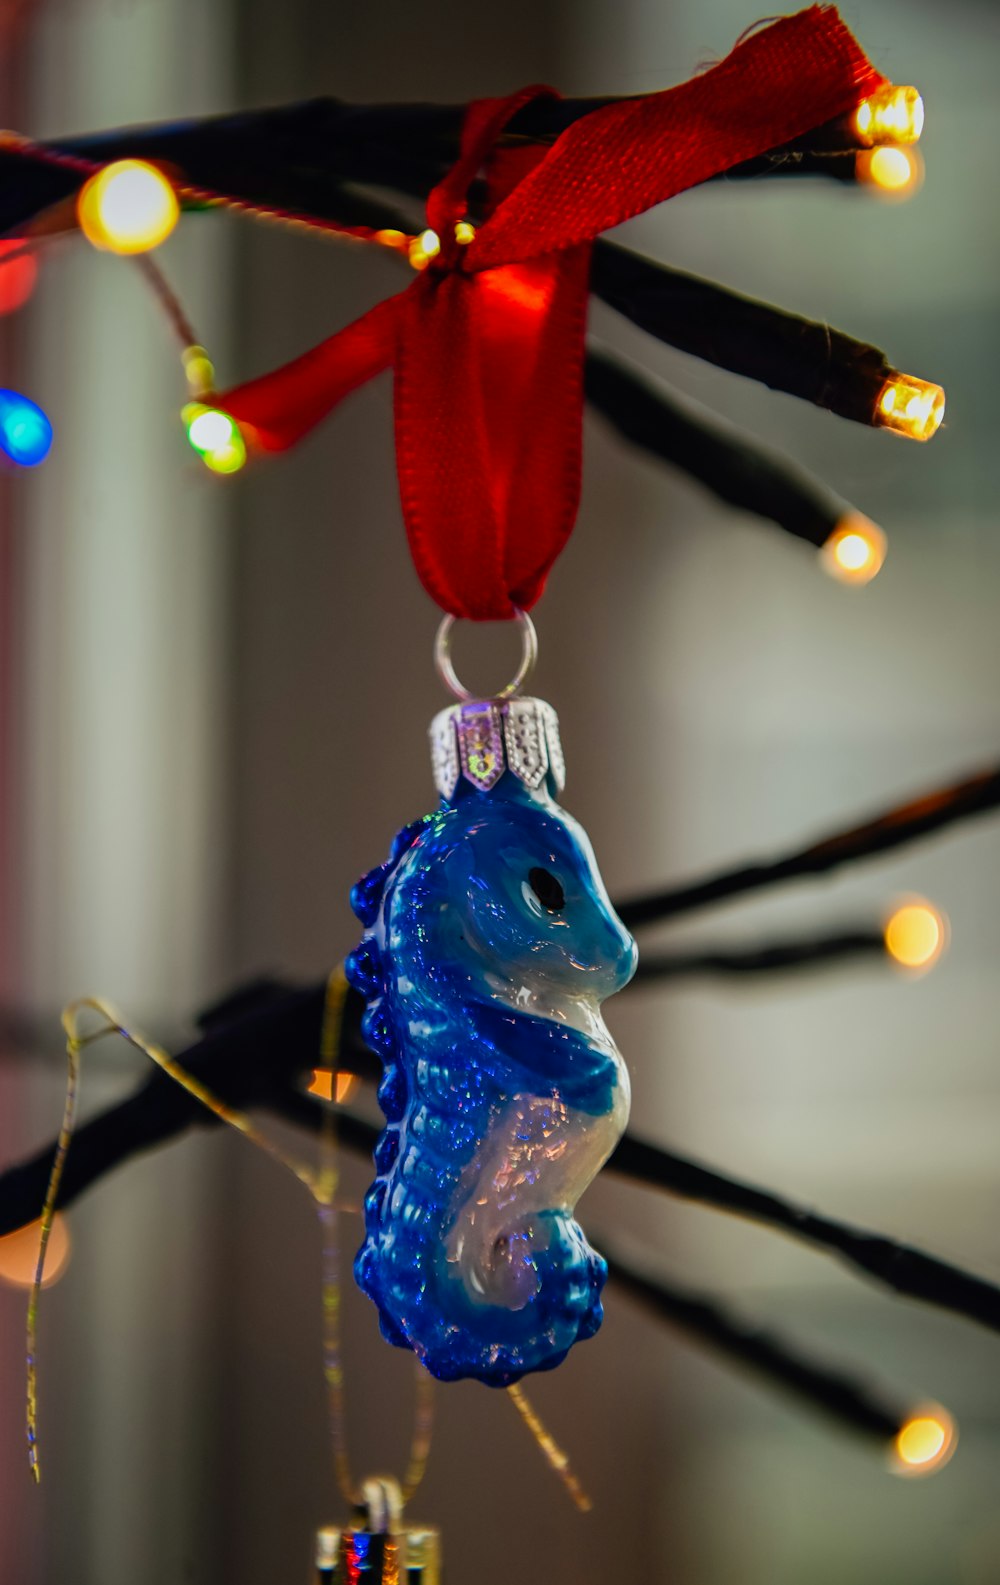 a glass ornament hanging from a tree